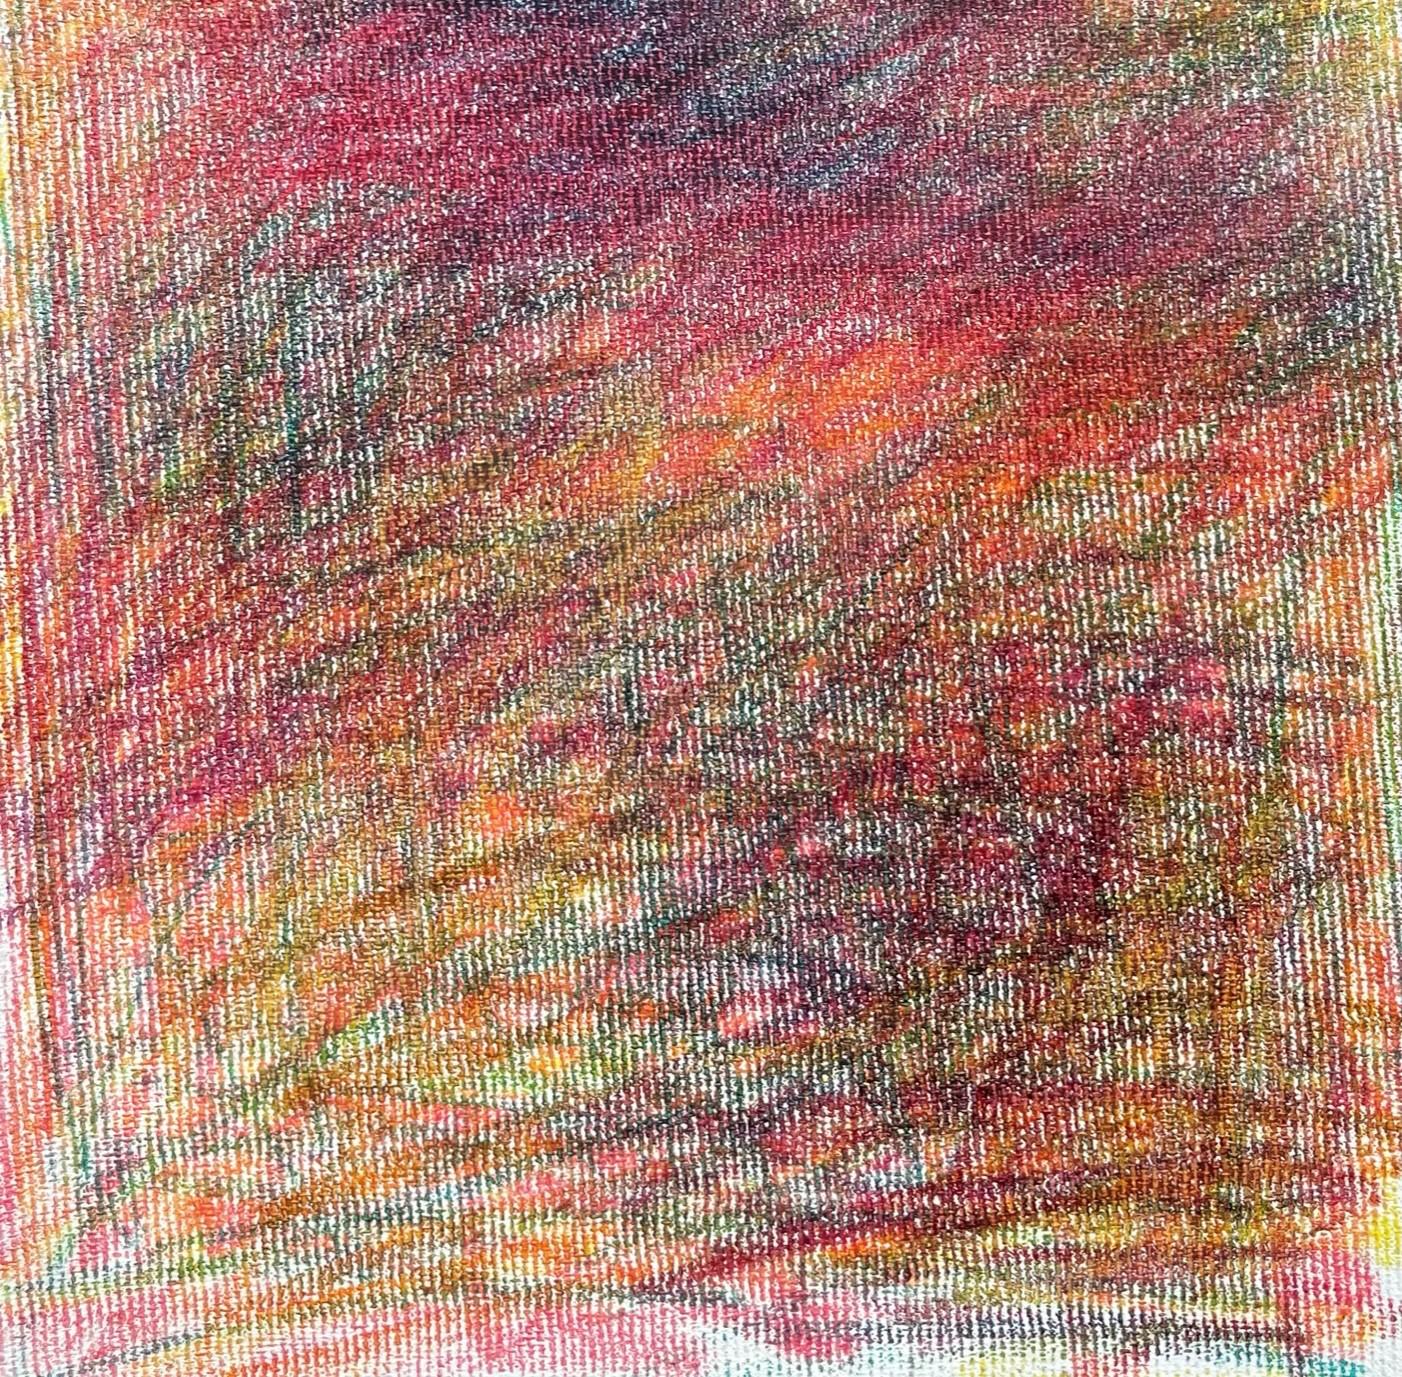 Body in the Field #5 - Blue, Red, Drawing, Color pencil - Expressionist Art by Zsolt Berszán